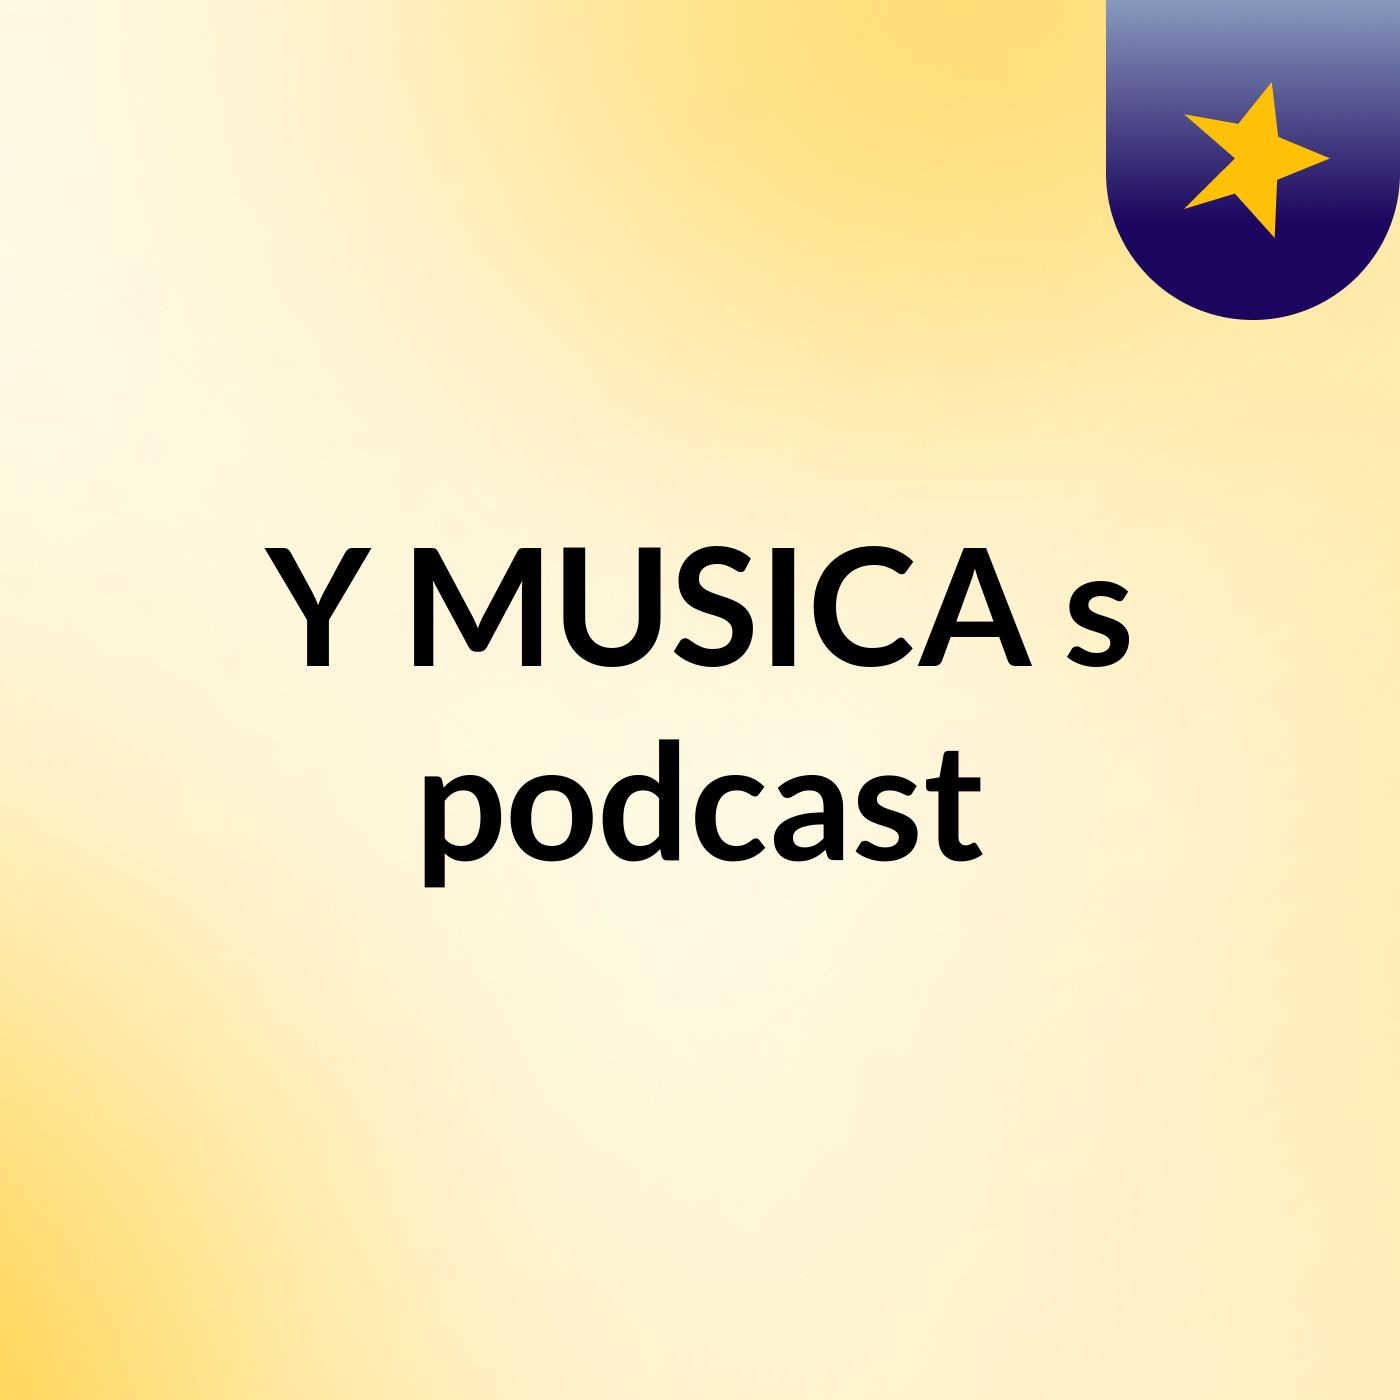 Episode 1 - Y MUSICA's podcast